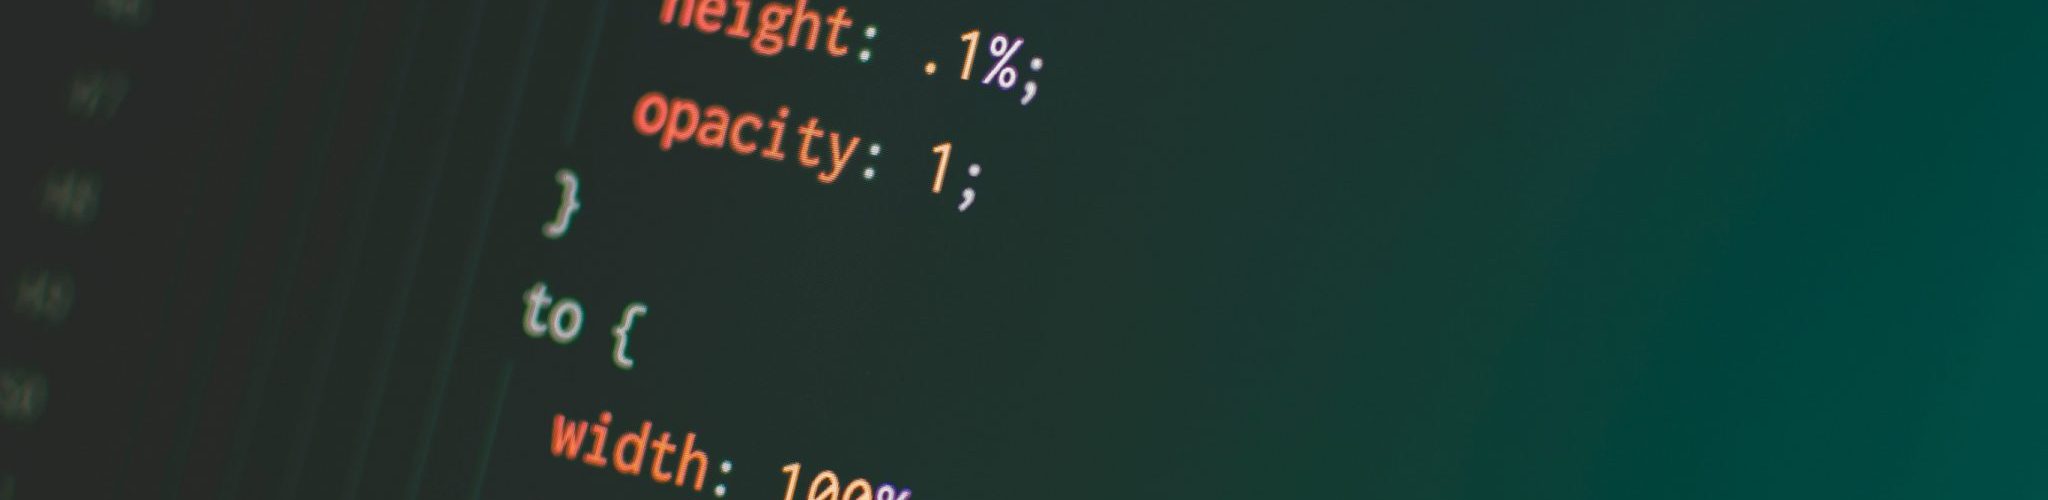 Image of css code on a computer screen